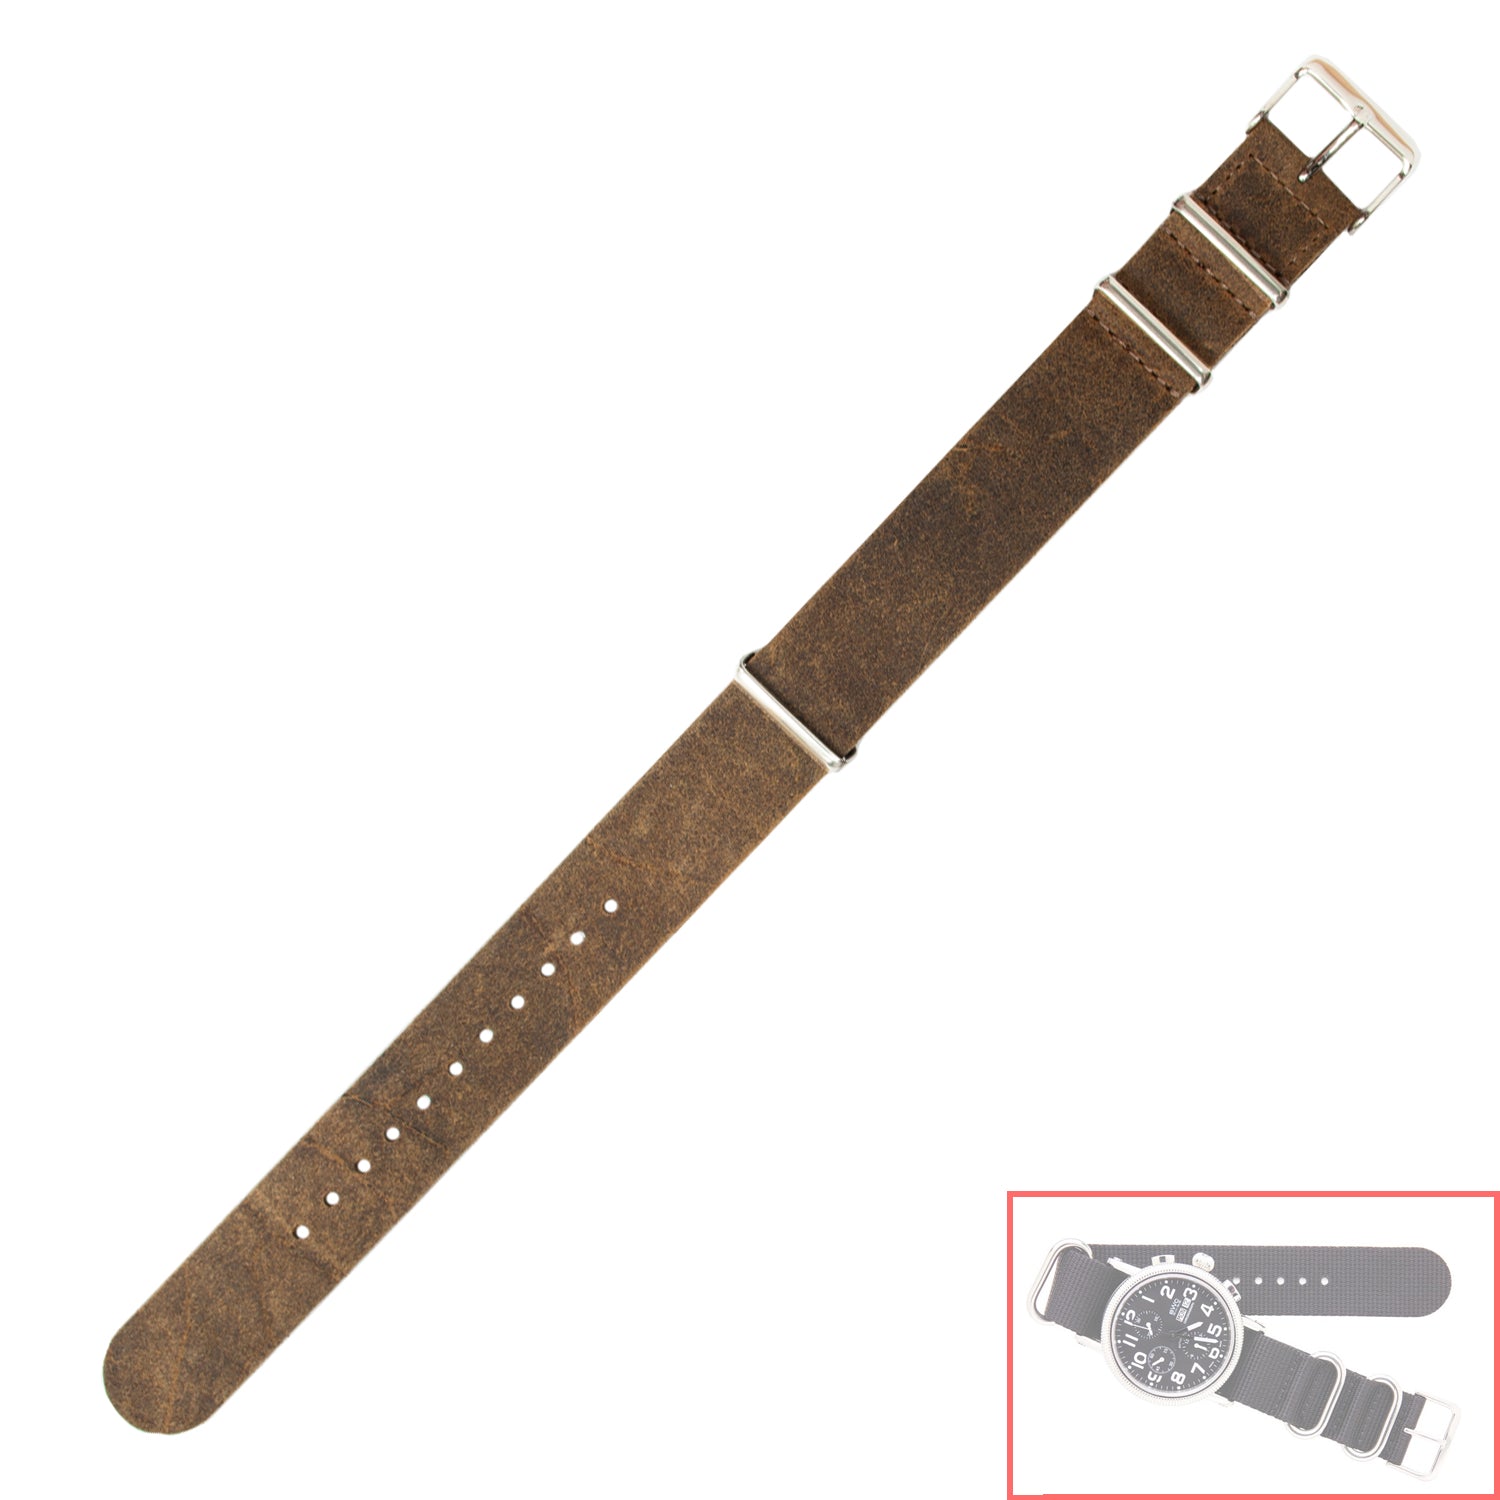 NSL No. 503 Genuine Leather Nato Style Straps with Steel Buckle  (20mm x 20mm)